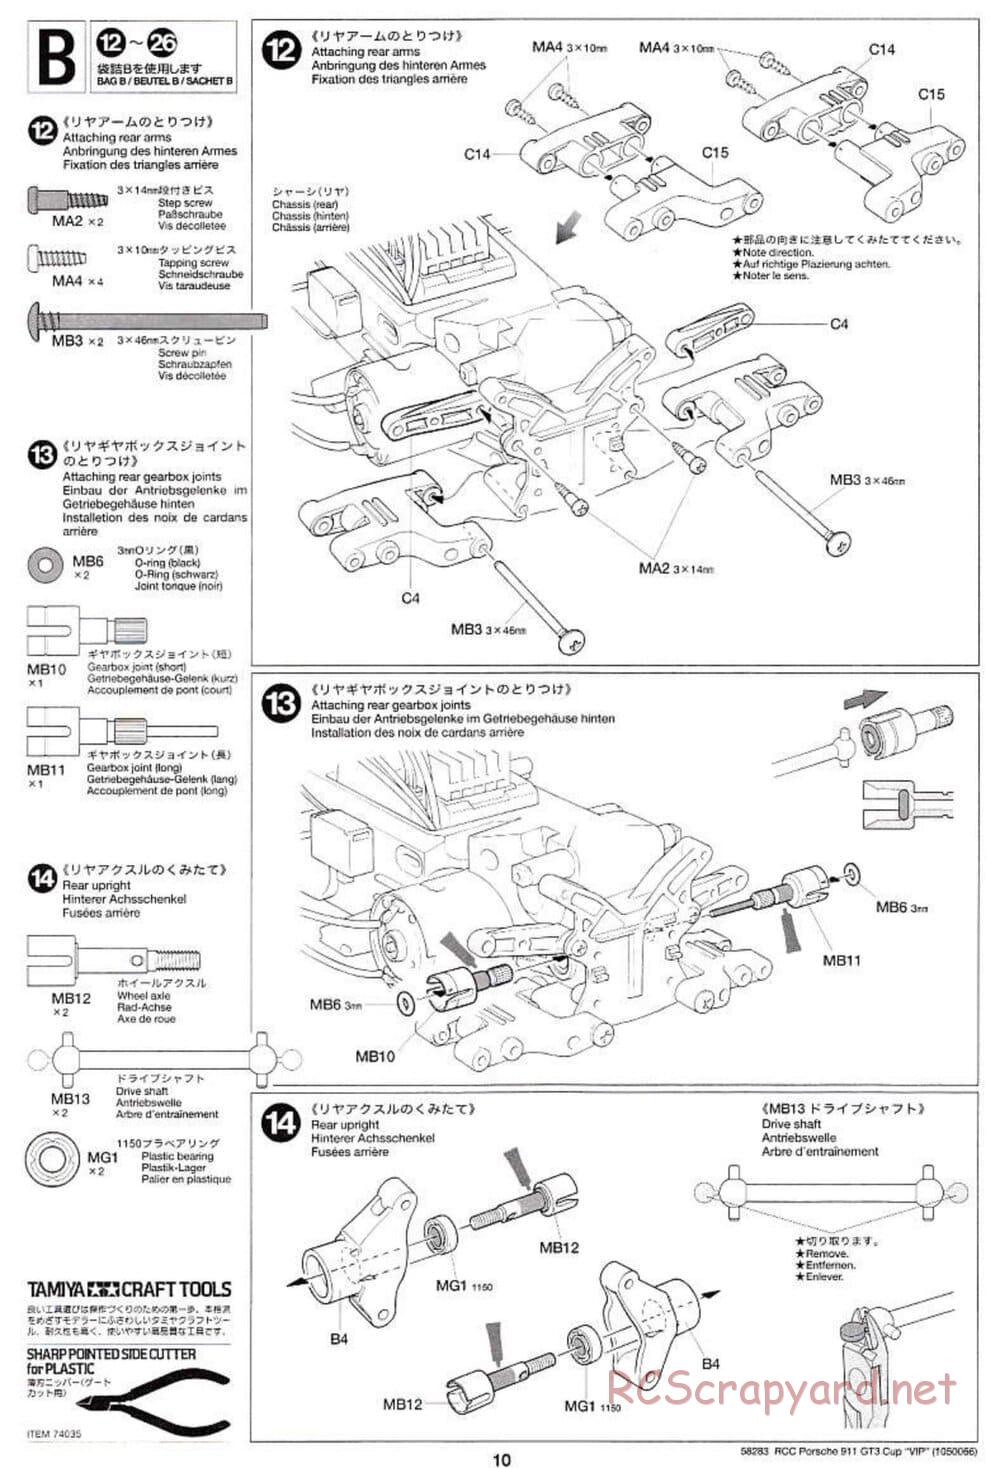 Tamiya - Porsche 911 GT3 Cup VIP - TL-01 Chassis - Manual - Page 10